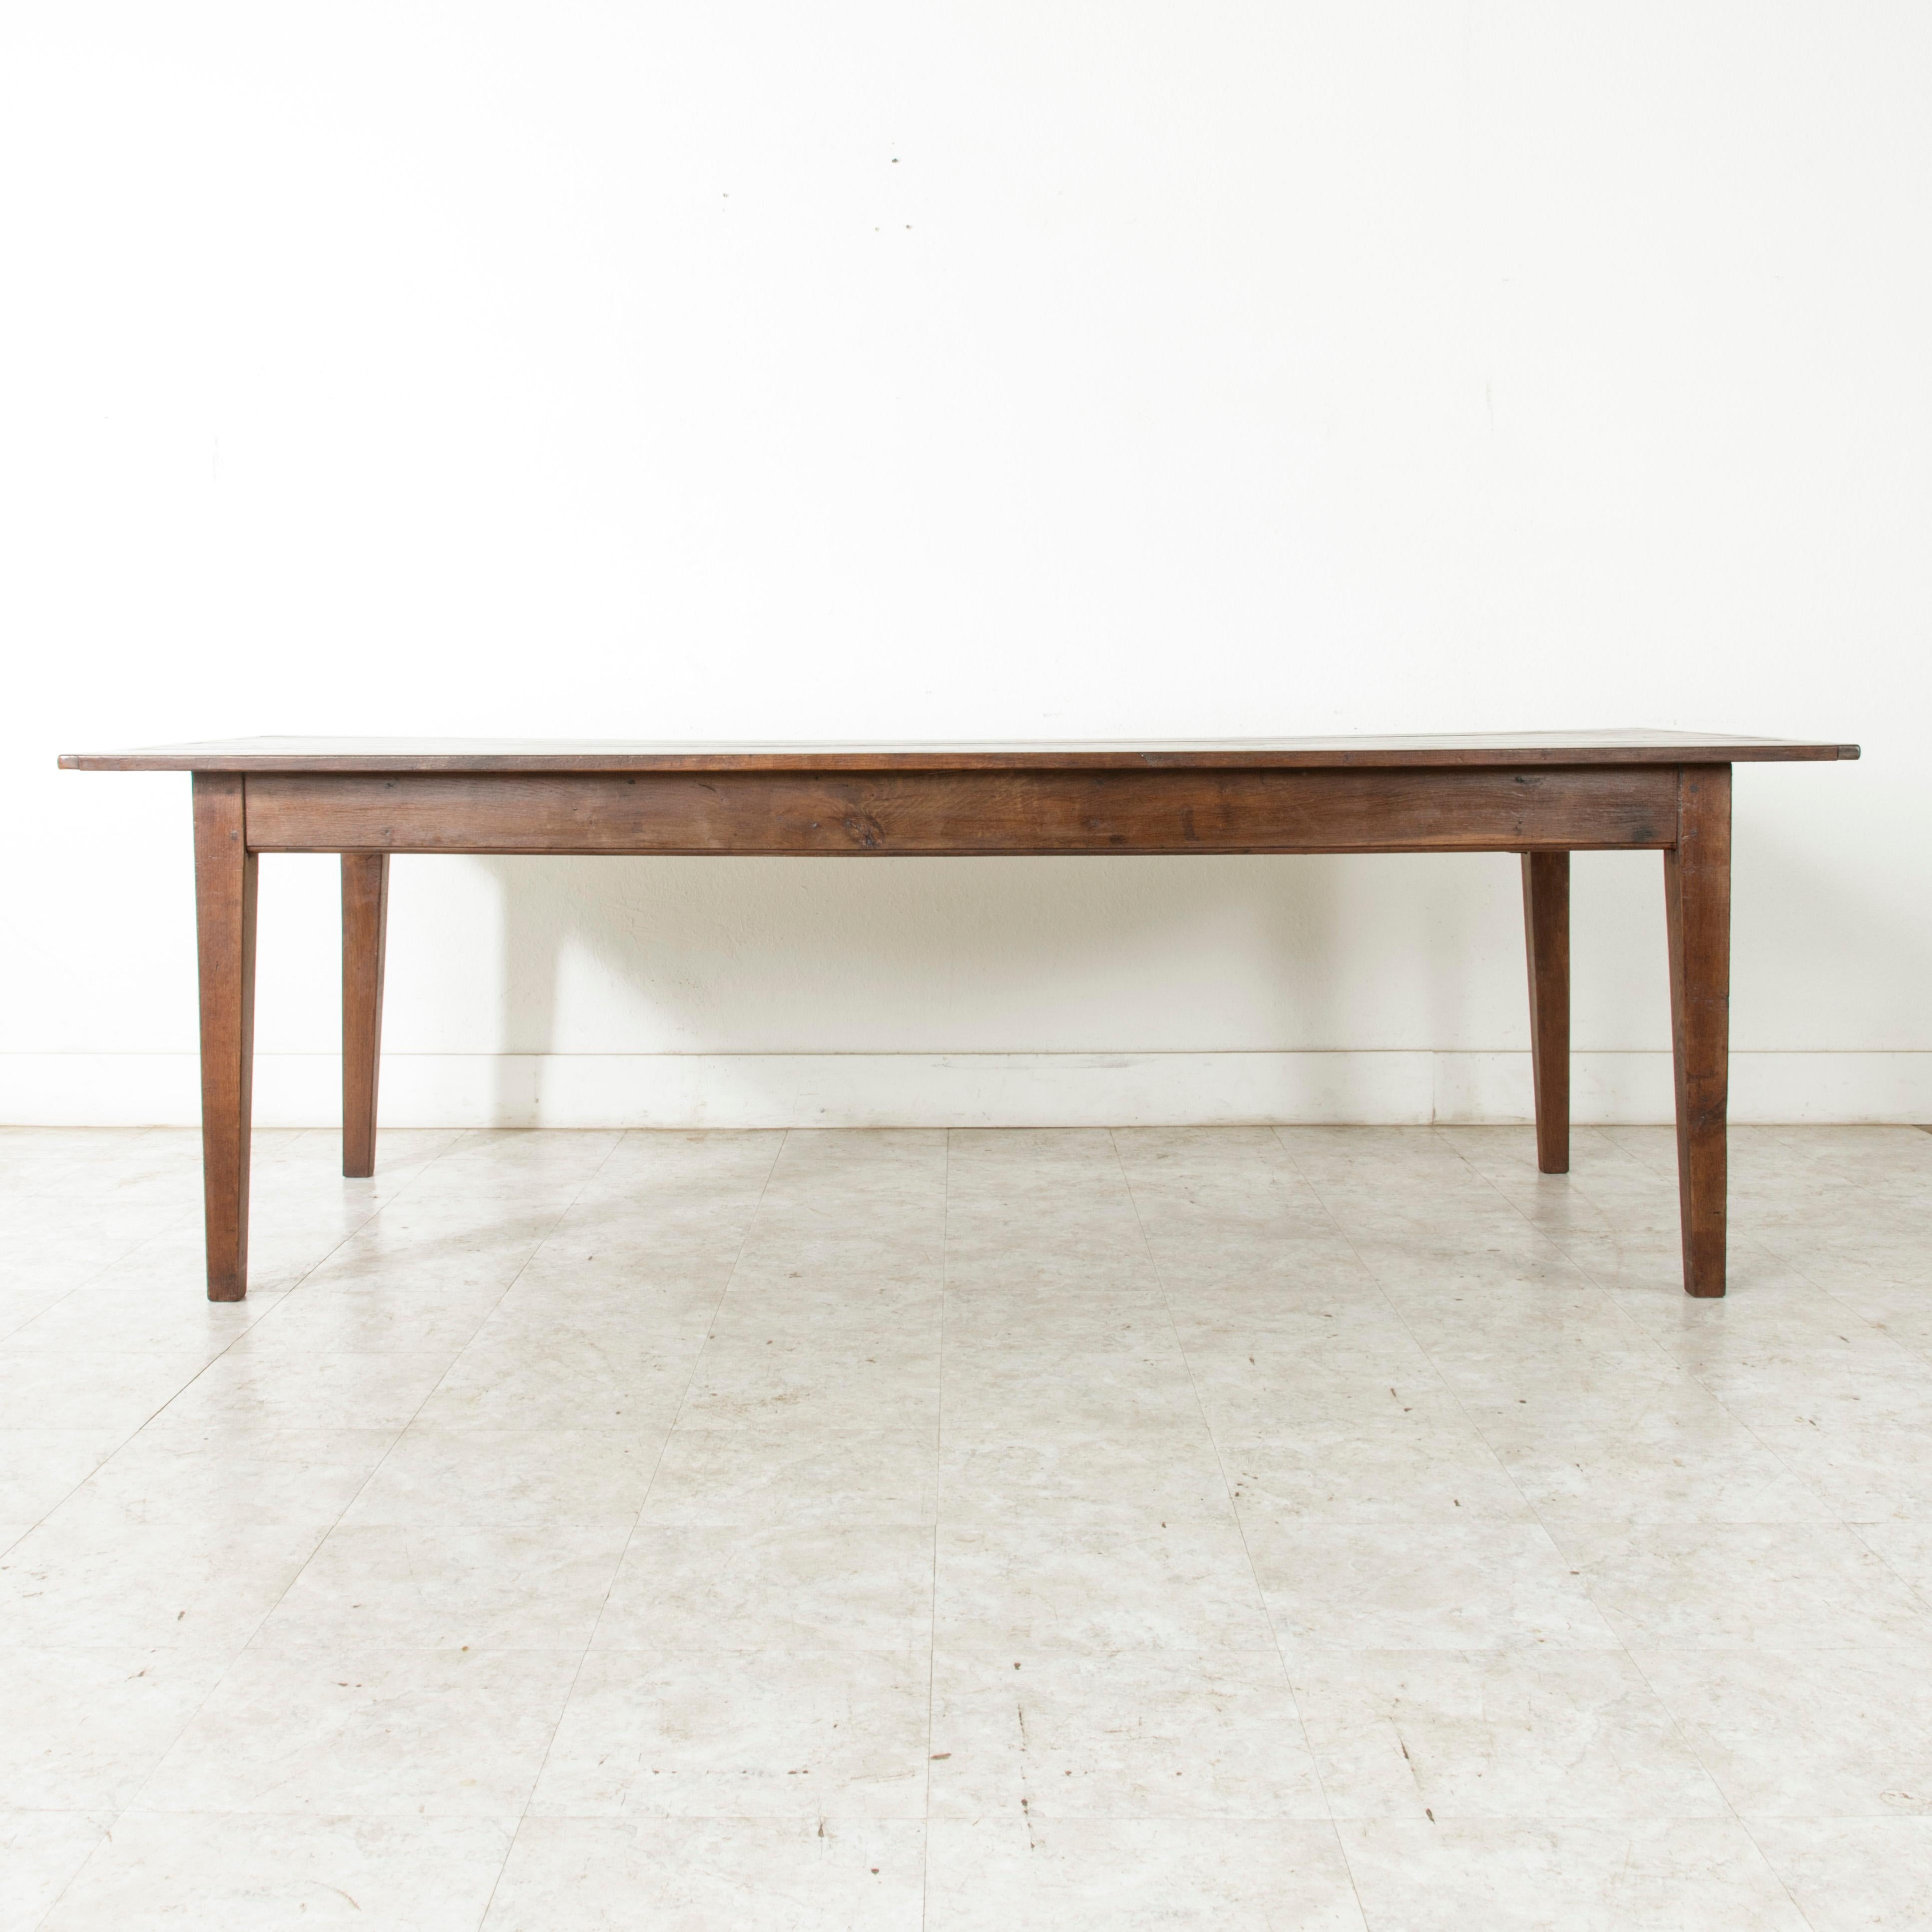 Long French Oak Farm Table or Dining Table with Two Drawers, circa 1900  1